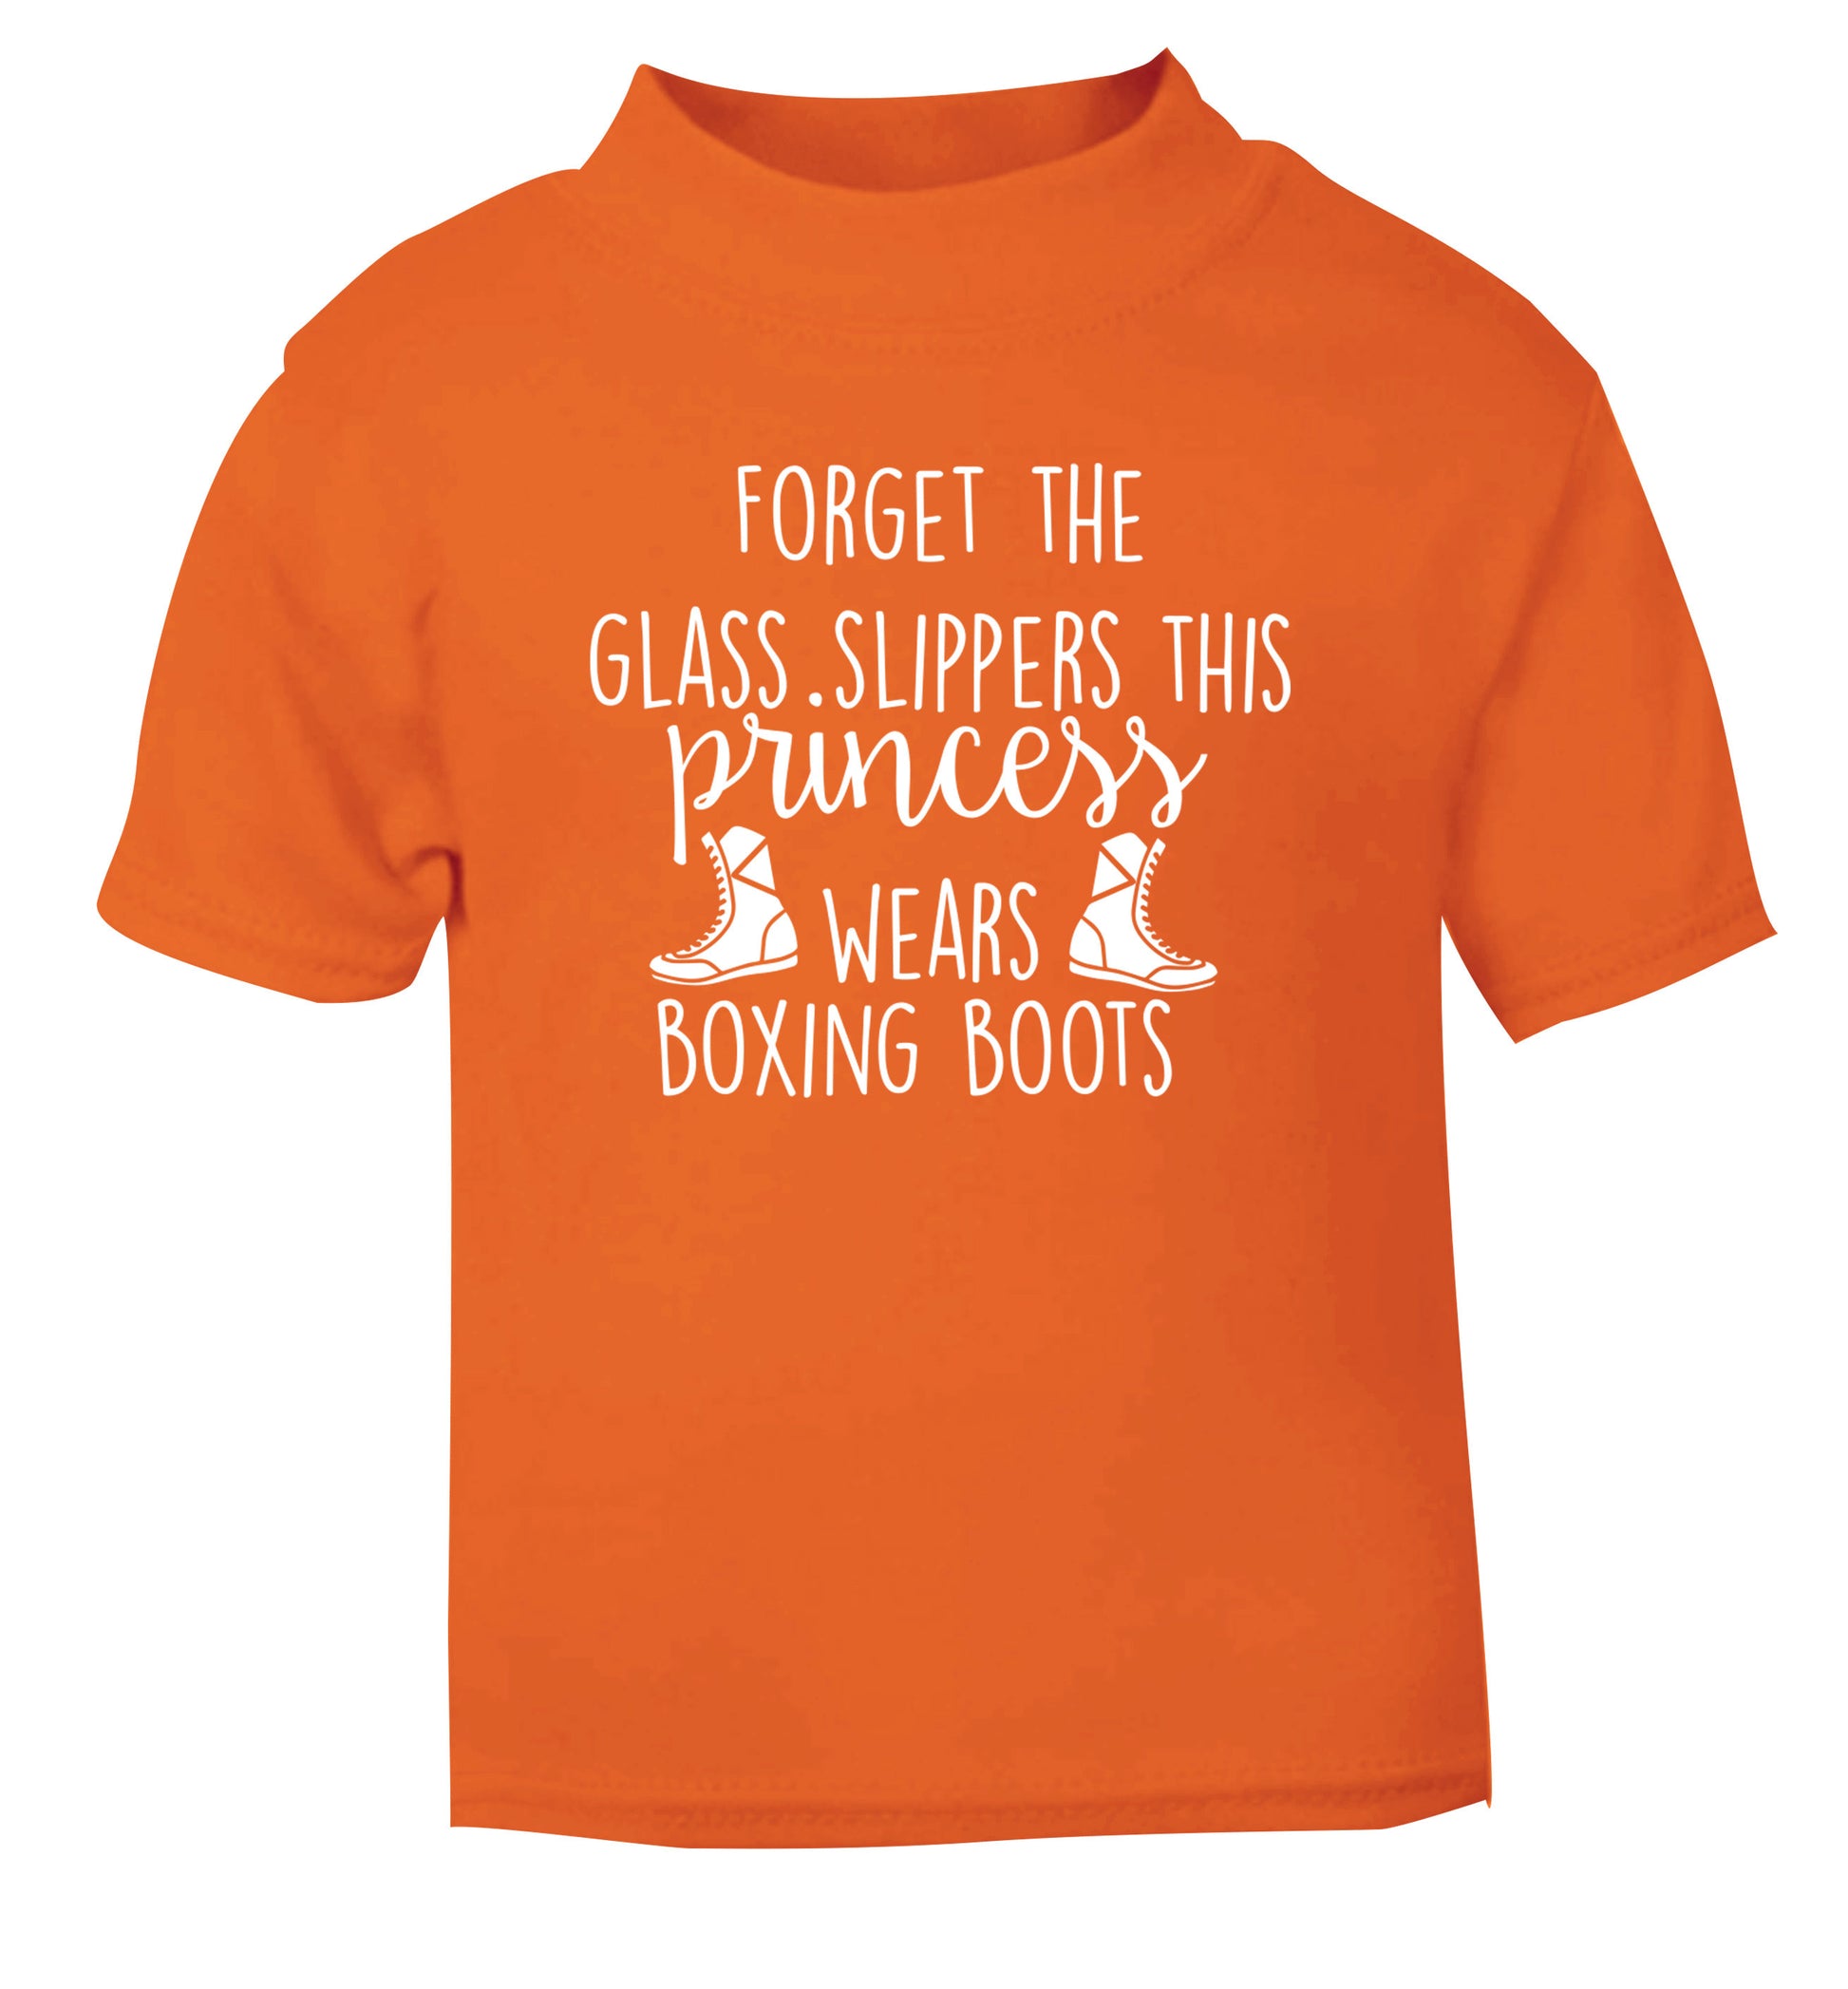 Forget the glass slippers this princess wears boxing boots orange Baby Toddler Tshirt 2 Years